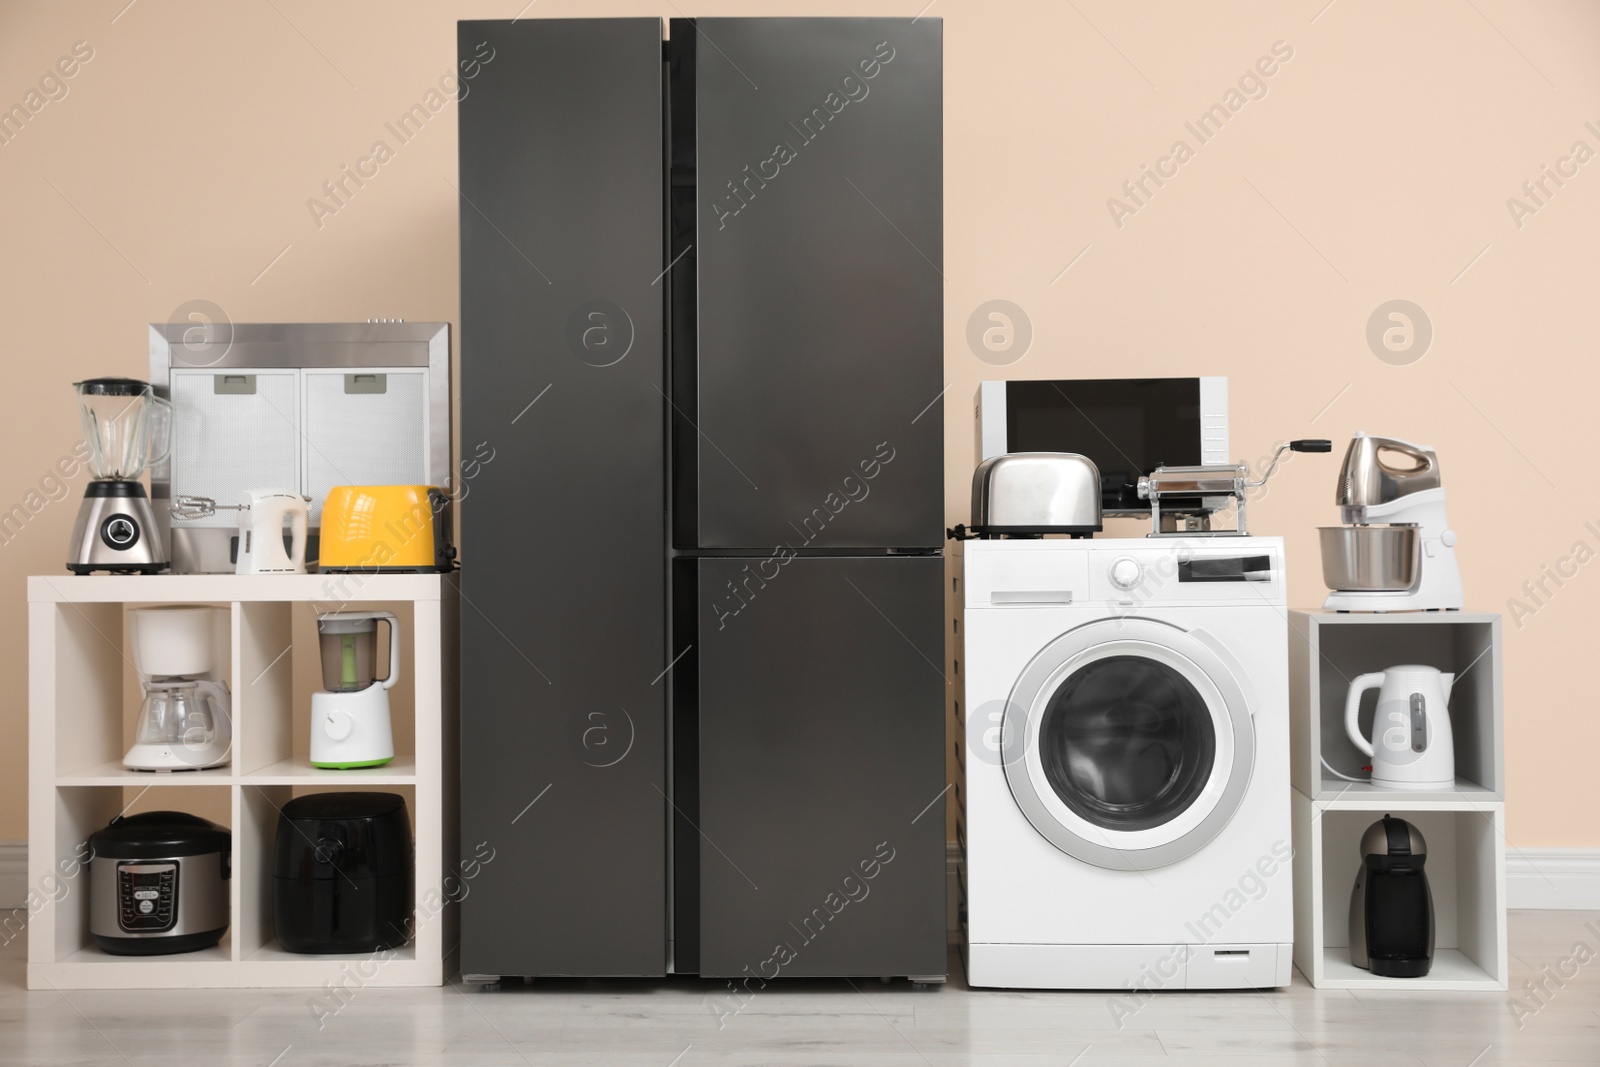 Photo of Modern refrigerator and other household appliances near beige wall indoors